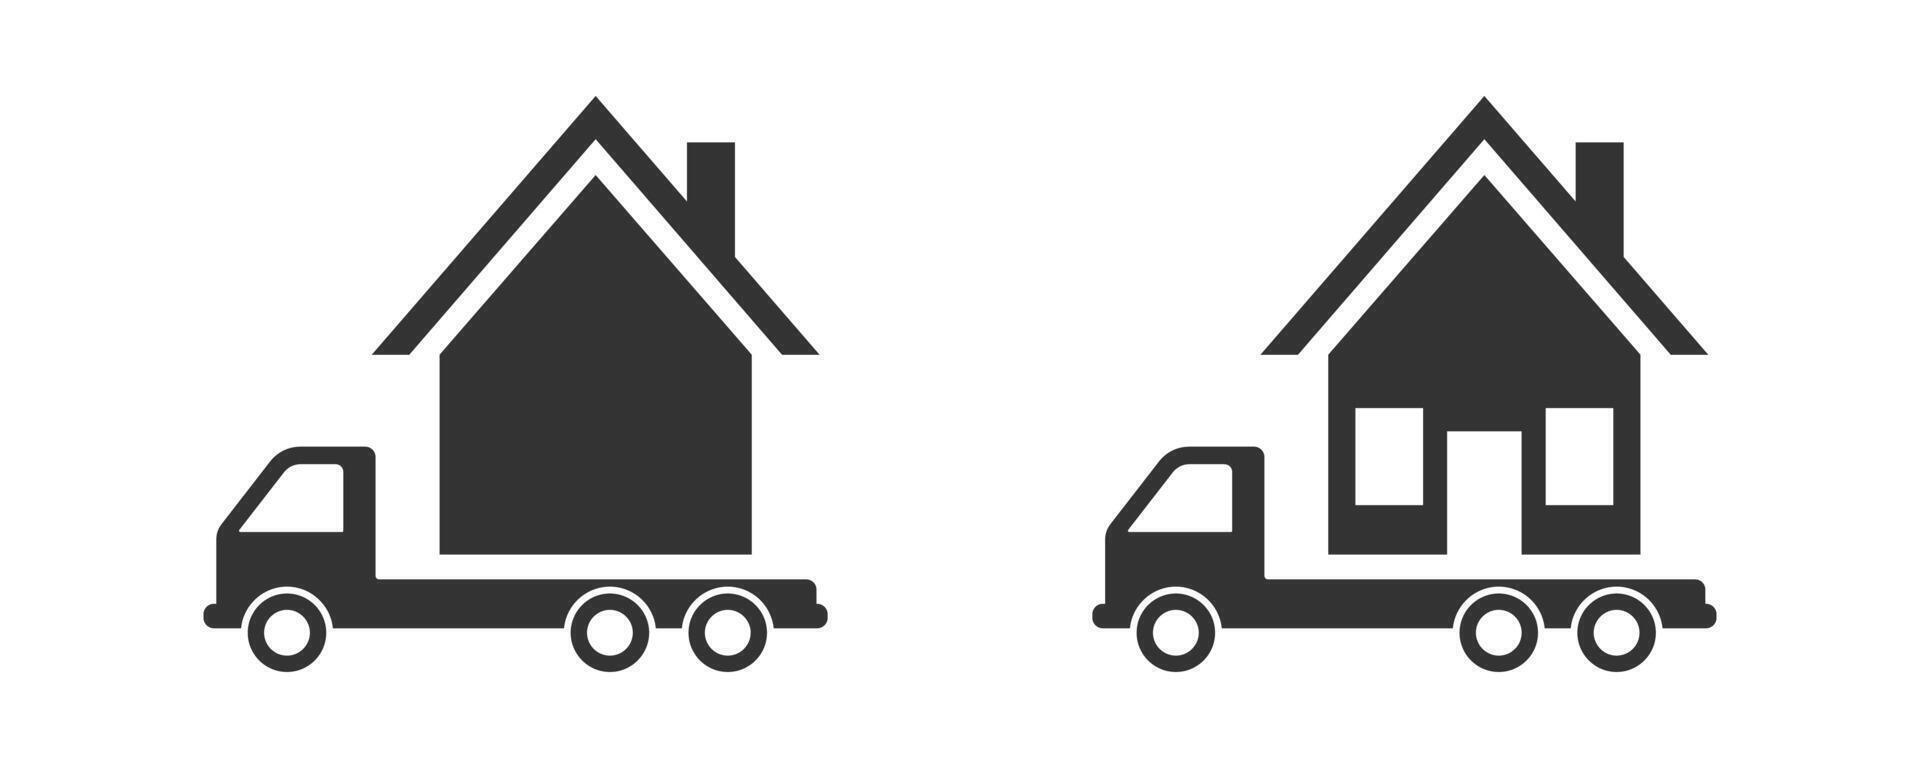 Move home icon. House on a truck icon. Vector illustration.